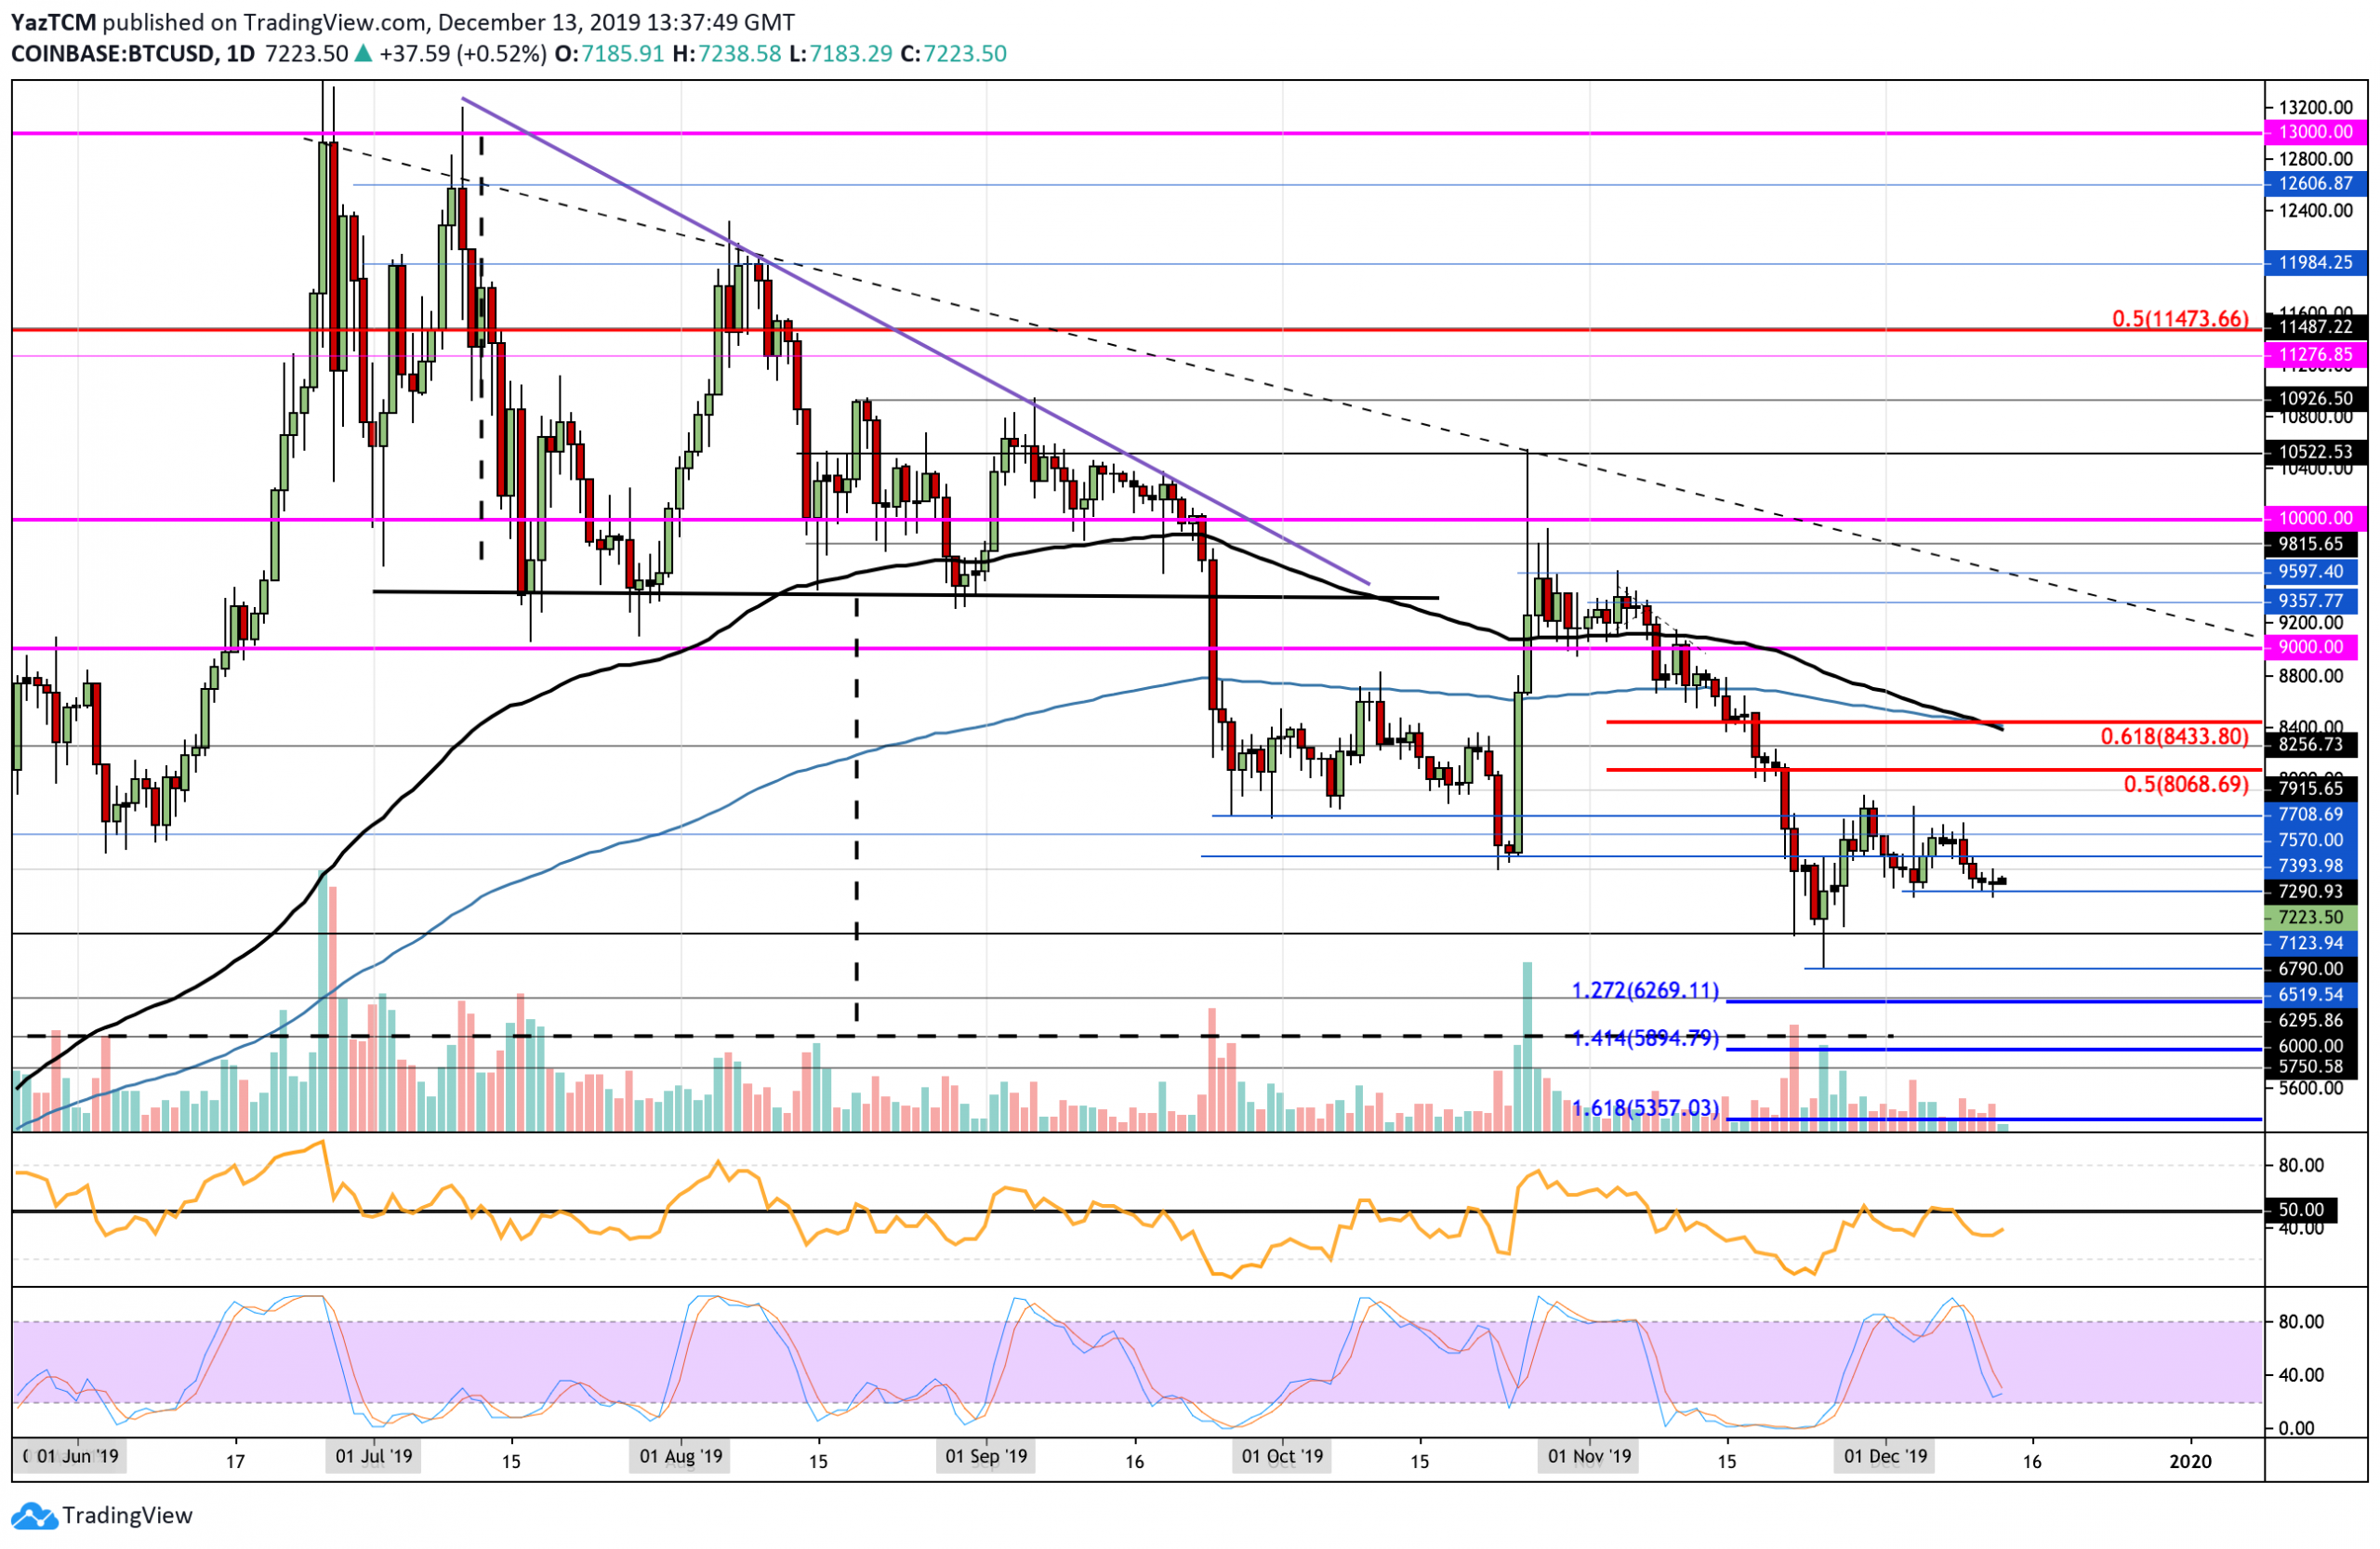 Crypto Price Analysis & Overview December 13th: Bitcoin, Ethereum, Ripple, Tezos, and Tron